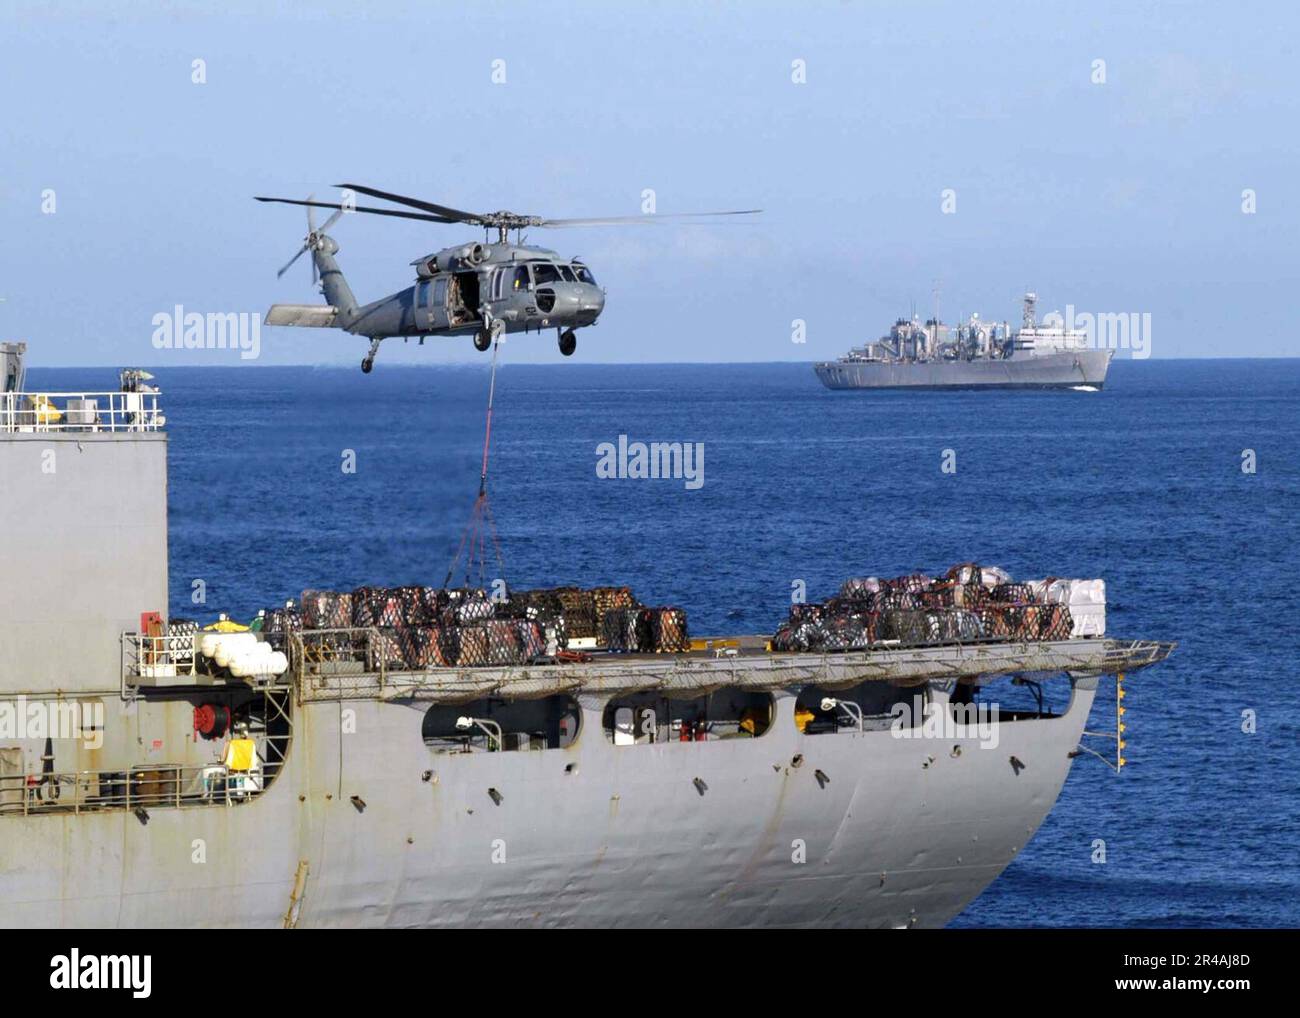 US Navy An MH-60S Knighthawk helicopter lowers cargo onto the deck of the Military Sealift Command (MSC) combat stores ship USNS San Jose (T-AFS 7) Stock Photo